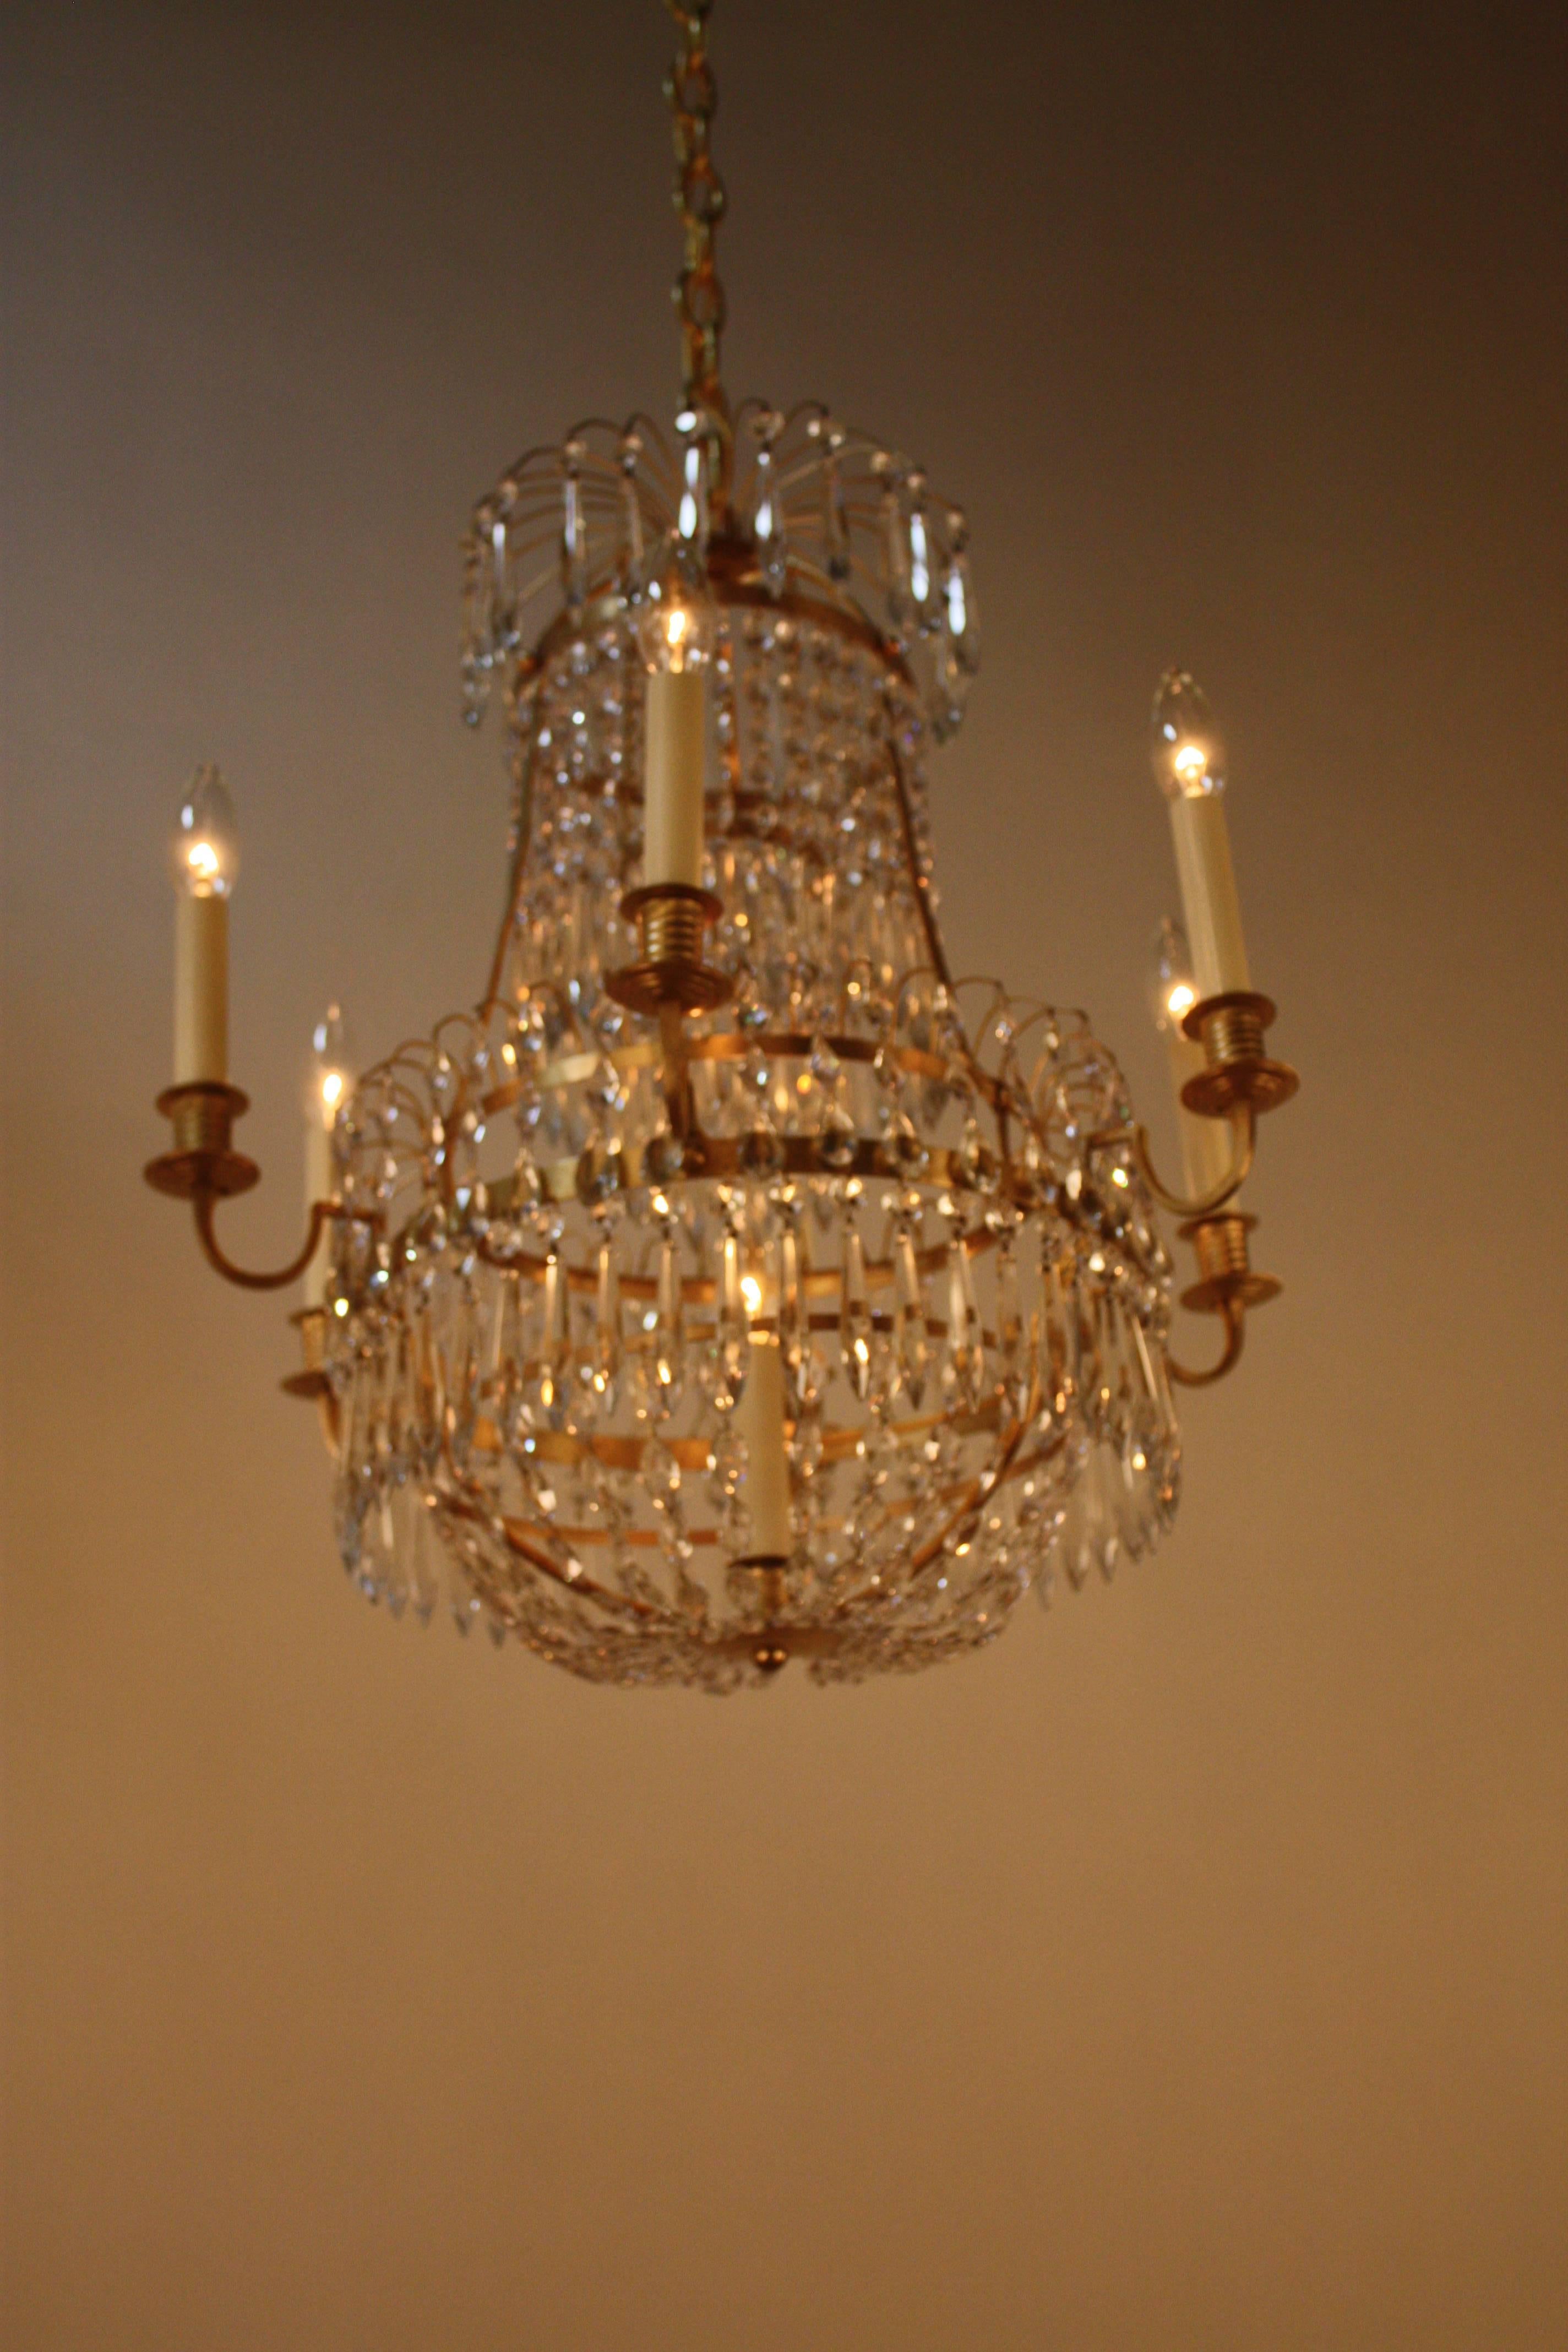 Made in France during the late part of 19th century. Seven-light simple bronze design with graduated crystal chain and faceted crystal drops.
The total height fully installed is 28